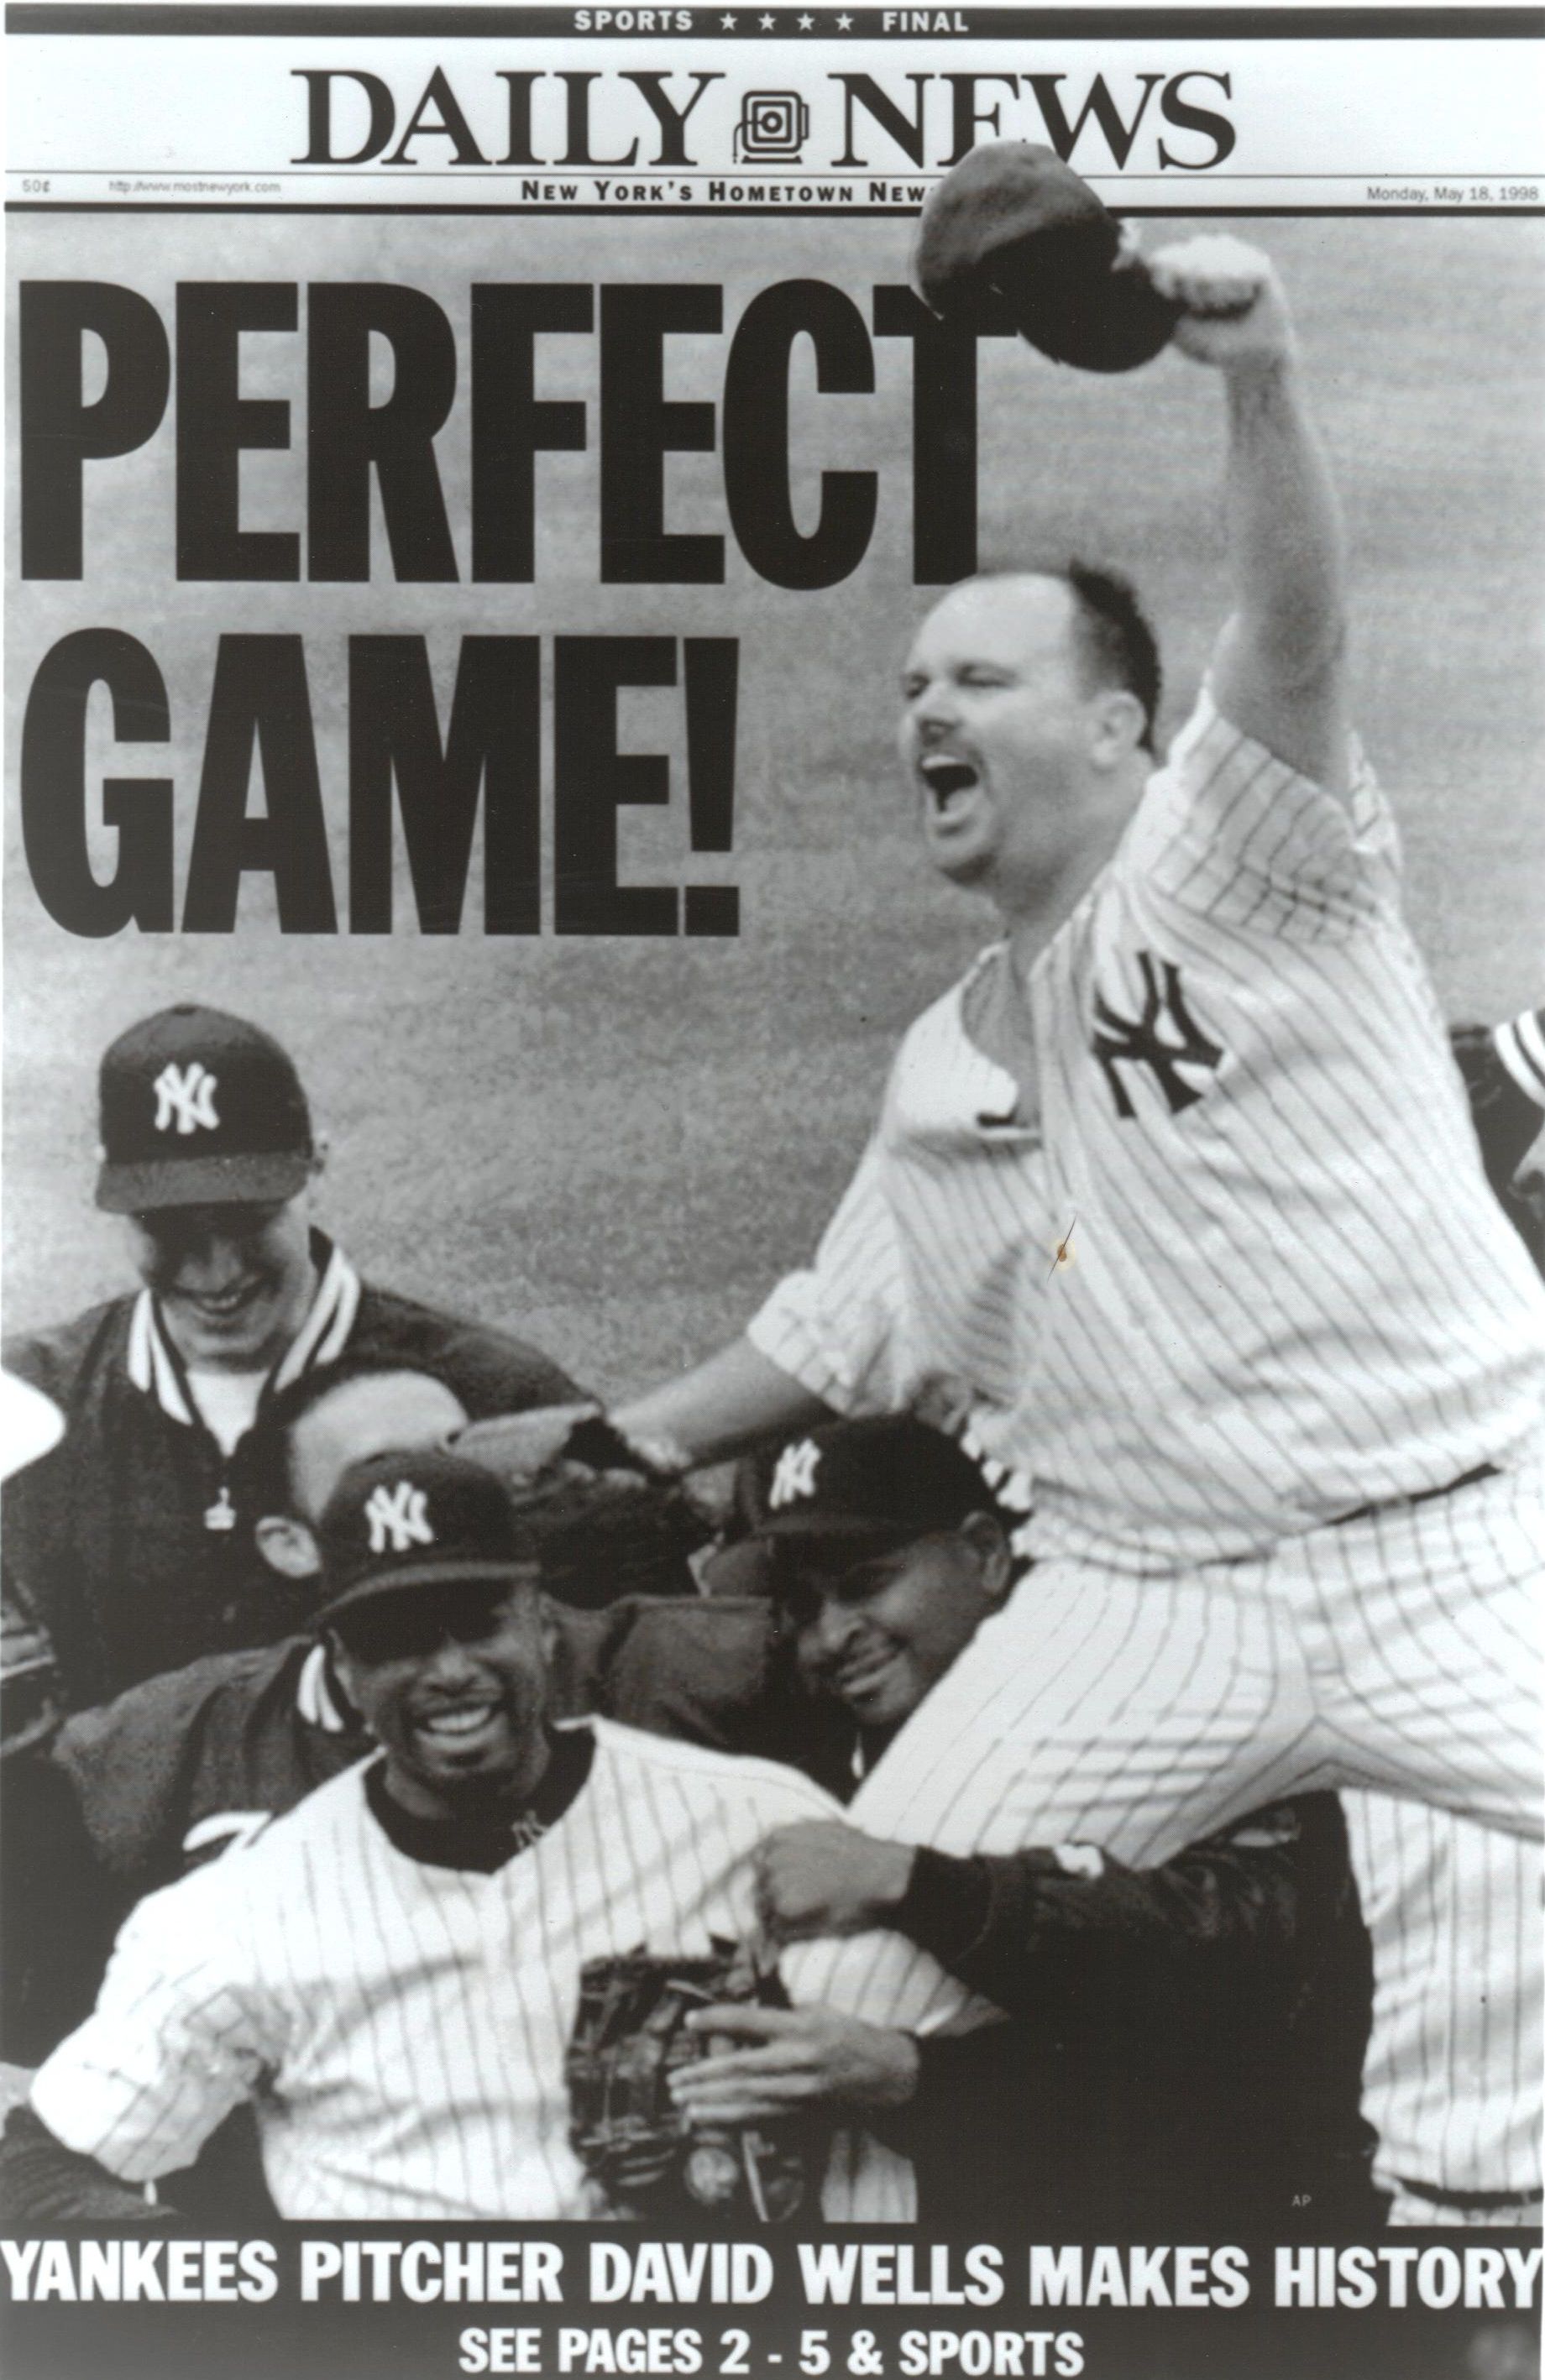 Daily News Cover of David Wells